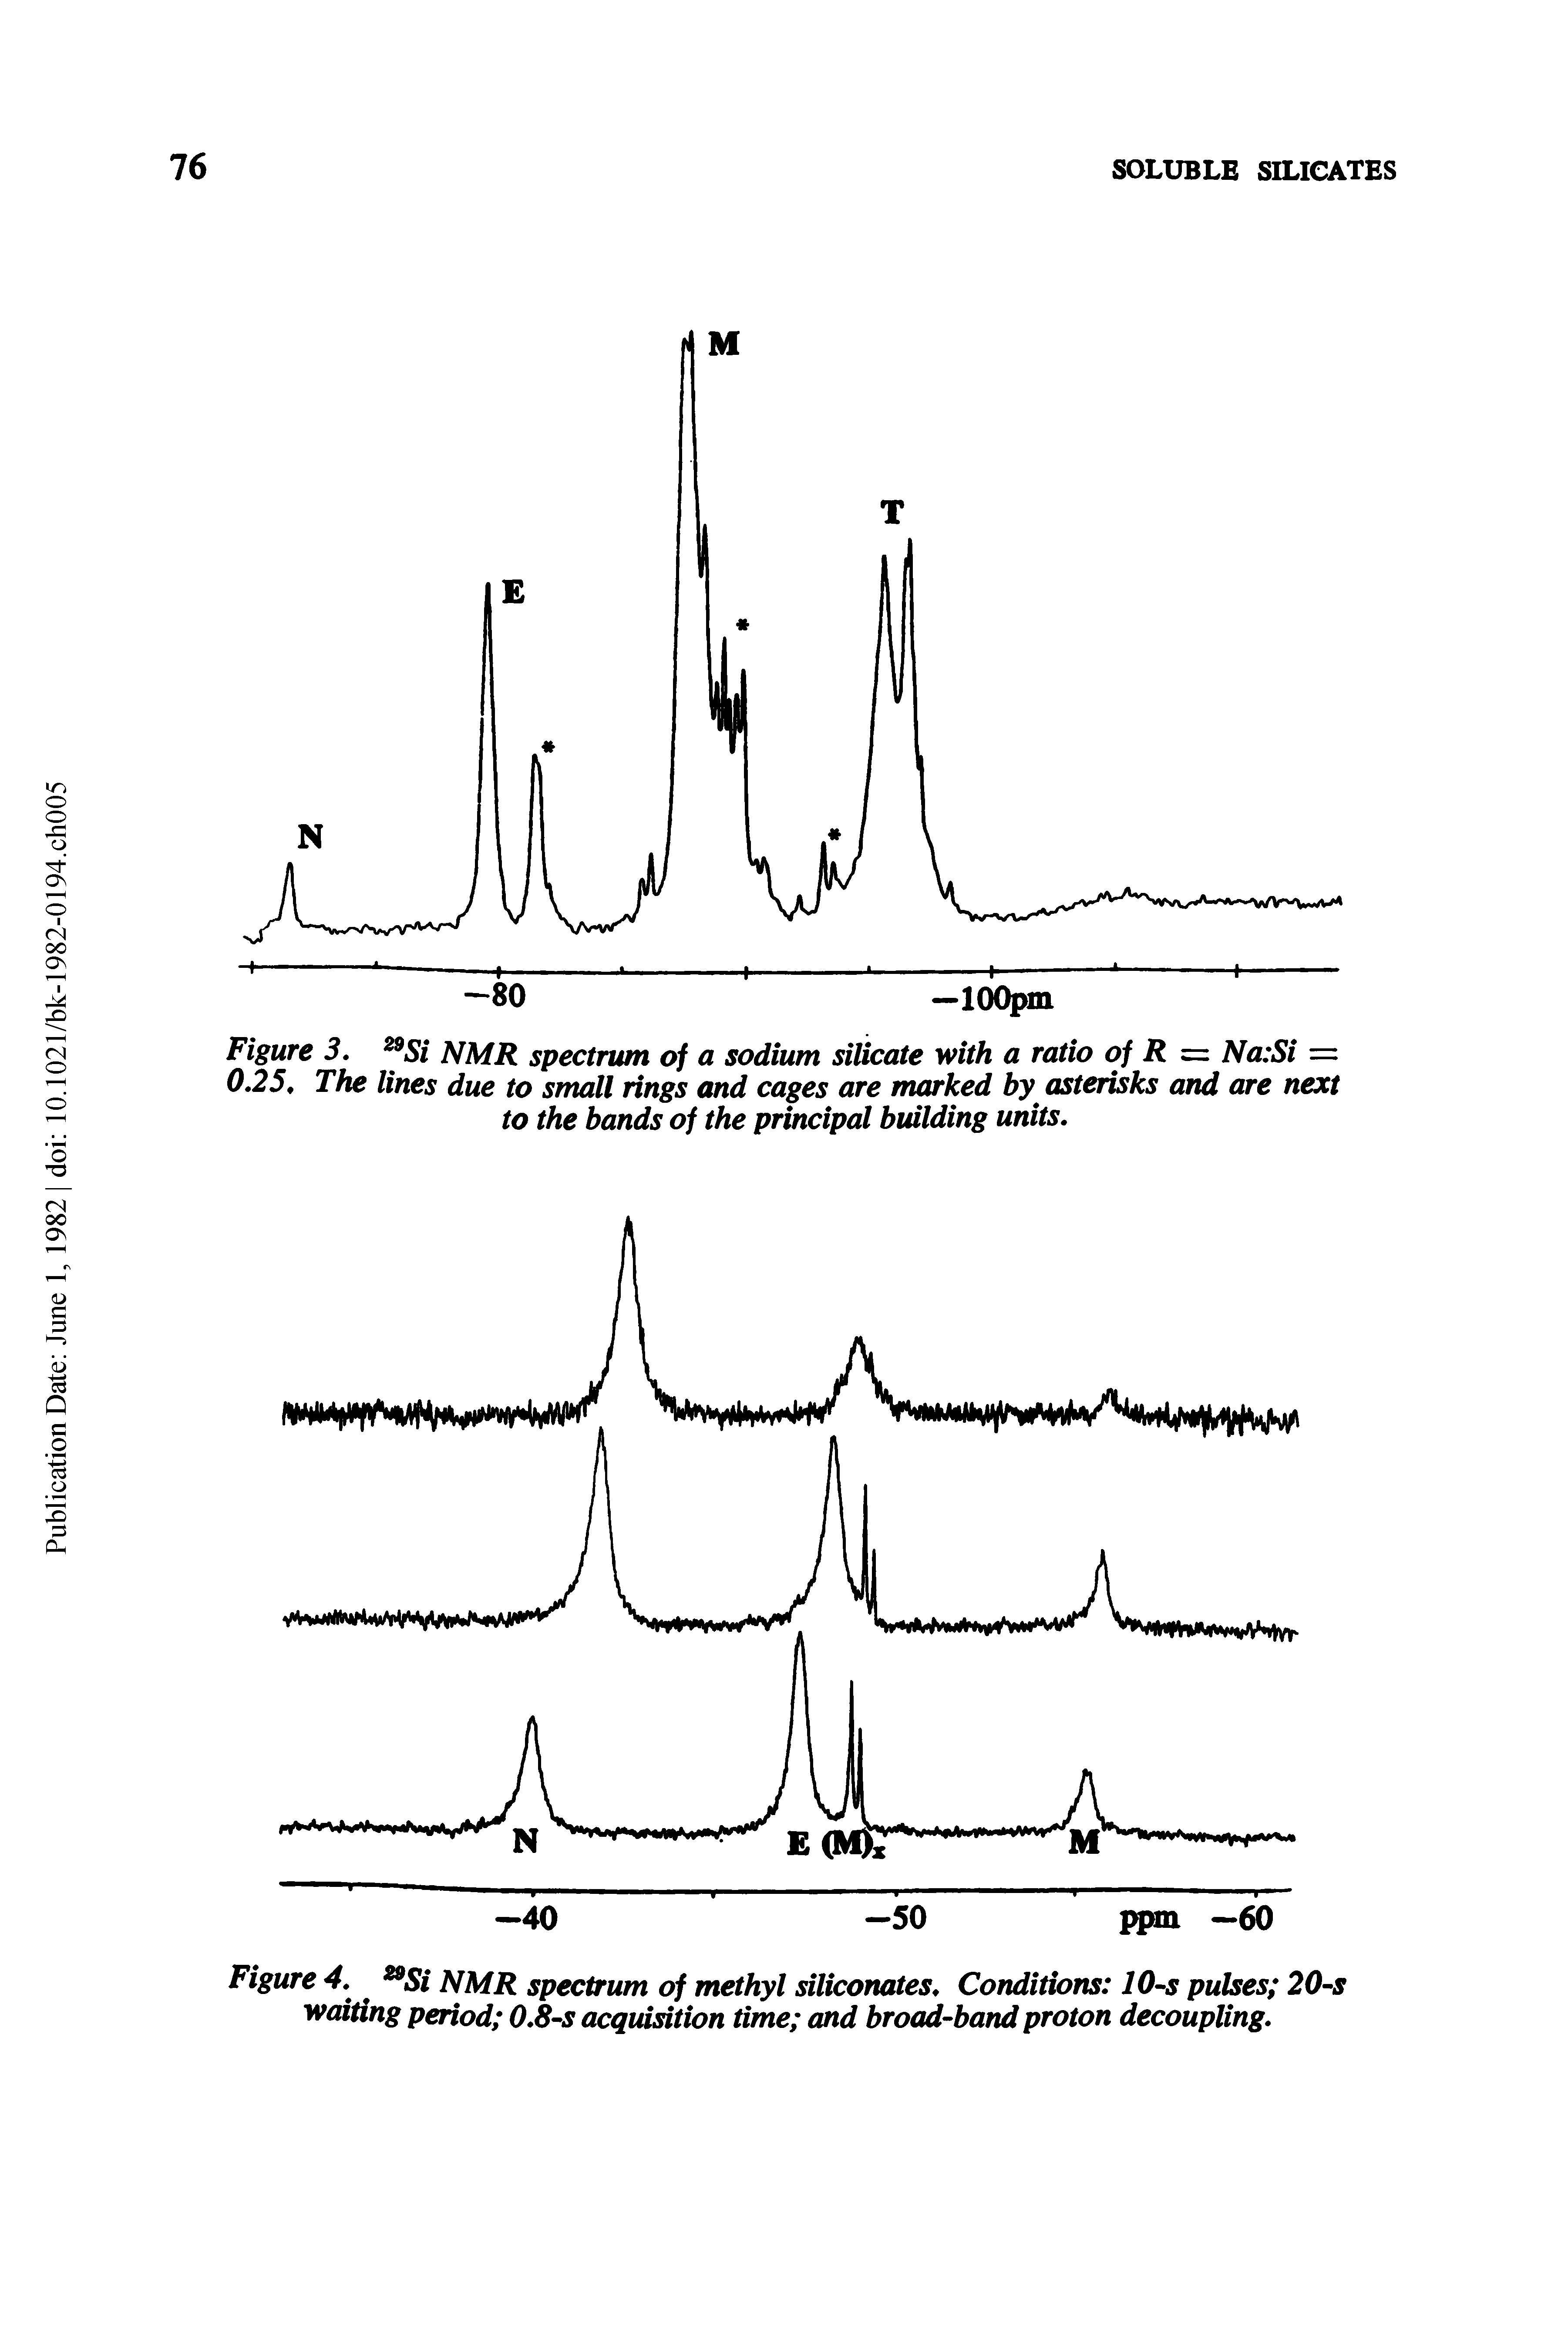 Figure 5. Si NMR spectrum of a sodium silicate with a ratio of R z=i Na Si == 0,25, The lines due to small rings and cages are marked by asterisks and are next to the bands of the principal building units.